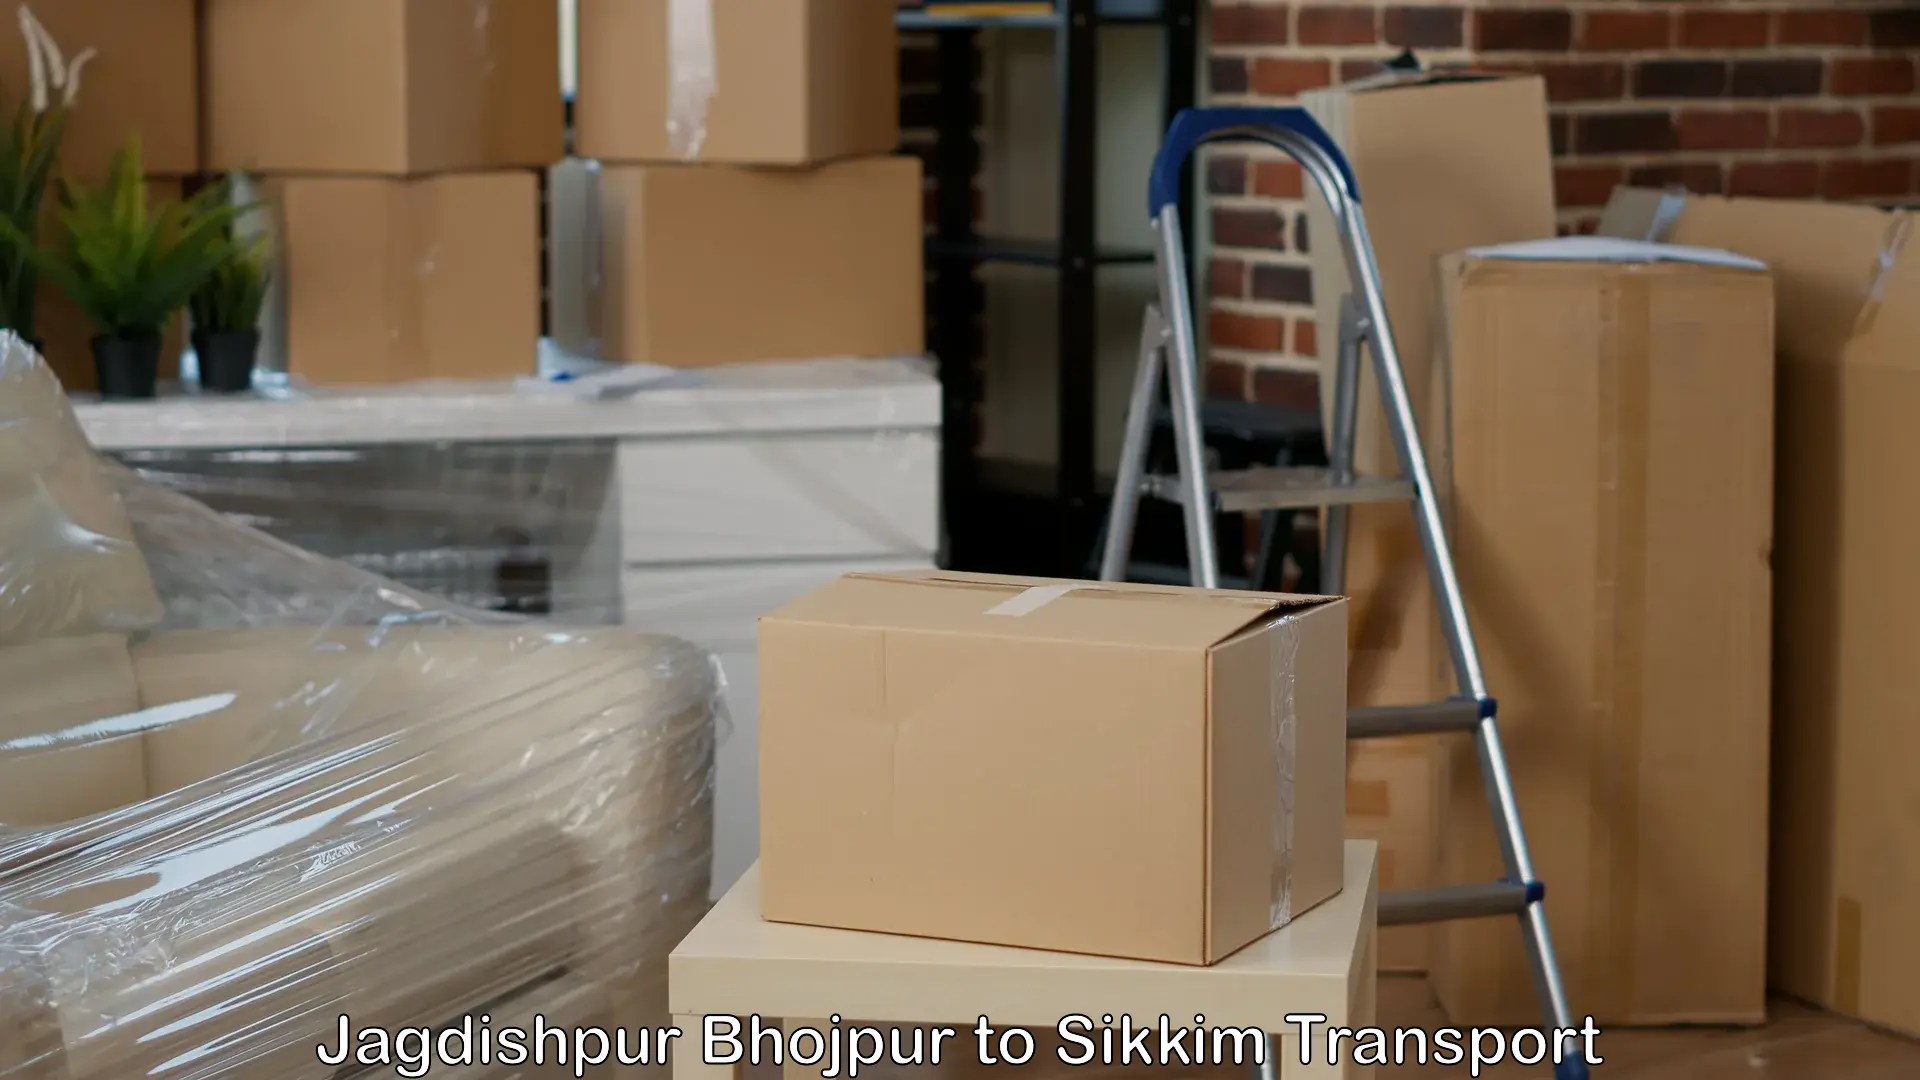 Daily parcel service transport Jagdishpur Bhojpur to Rongli